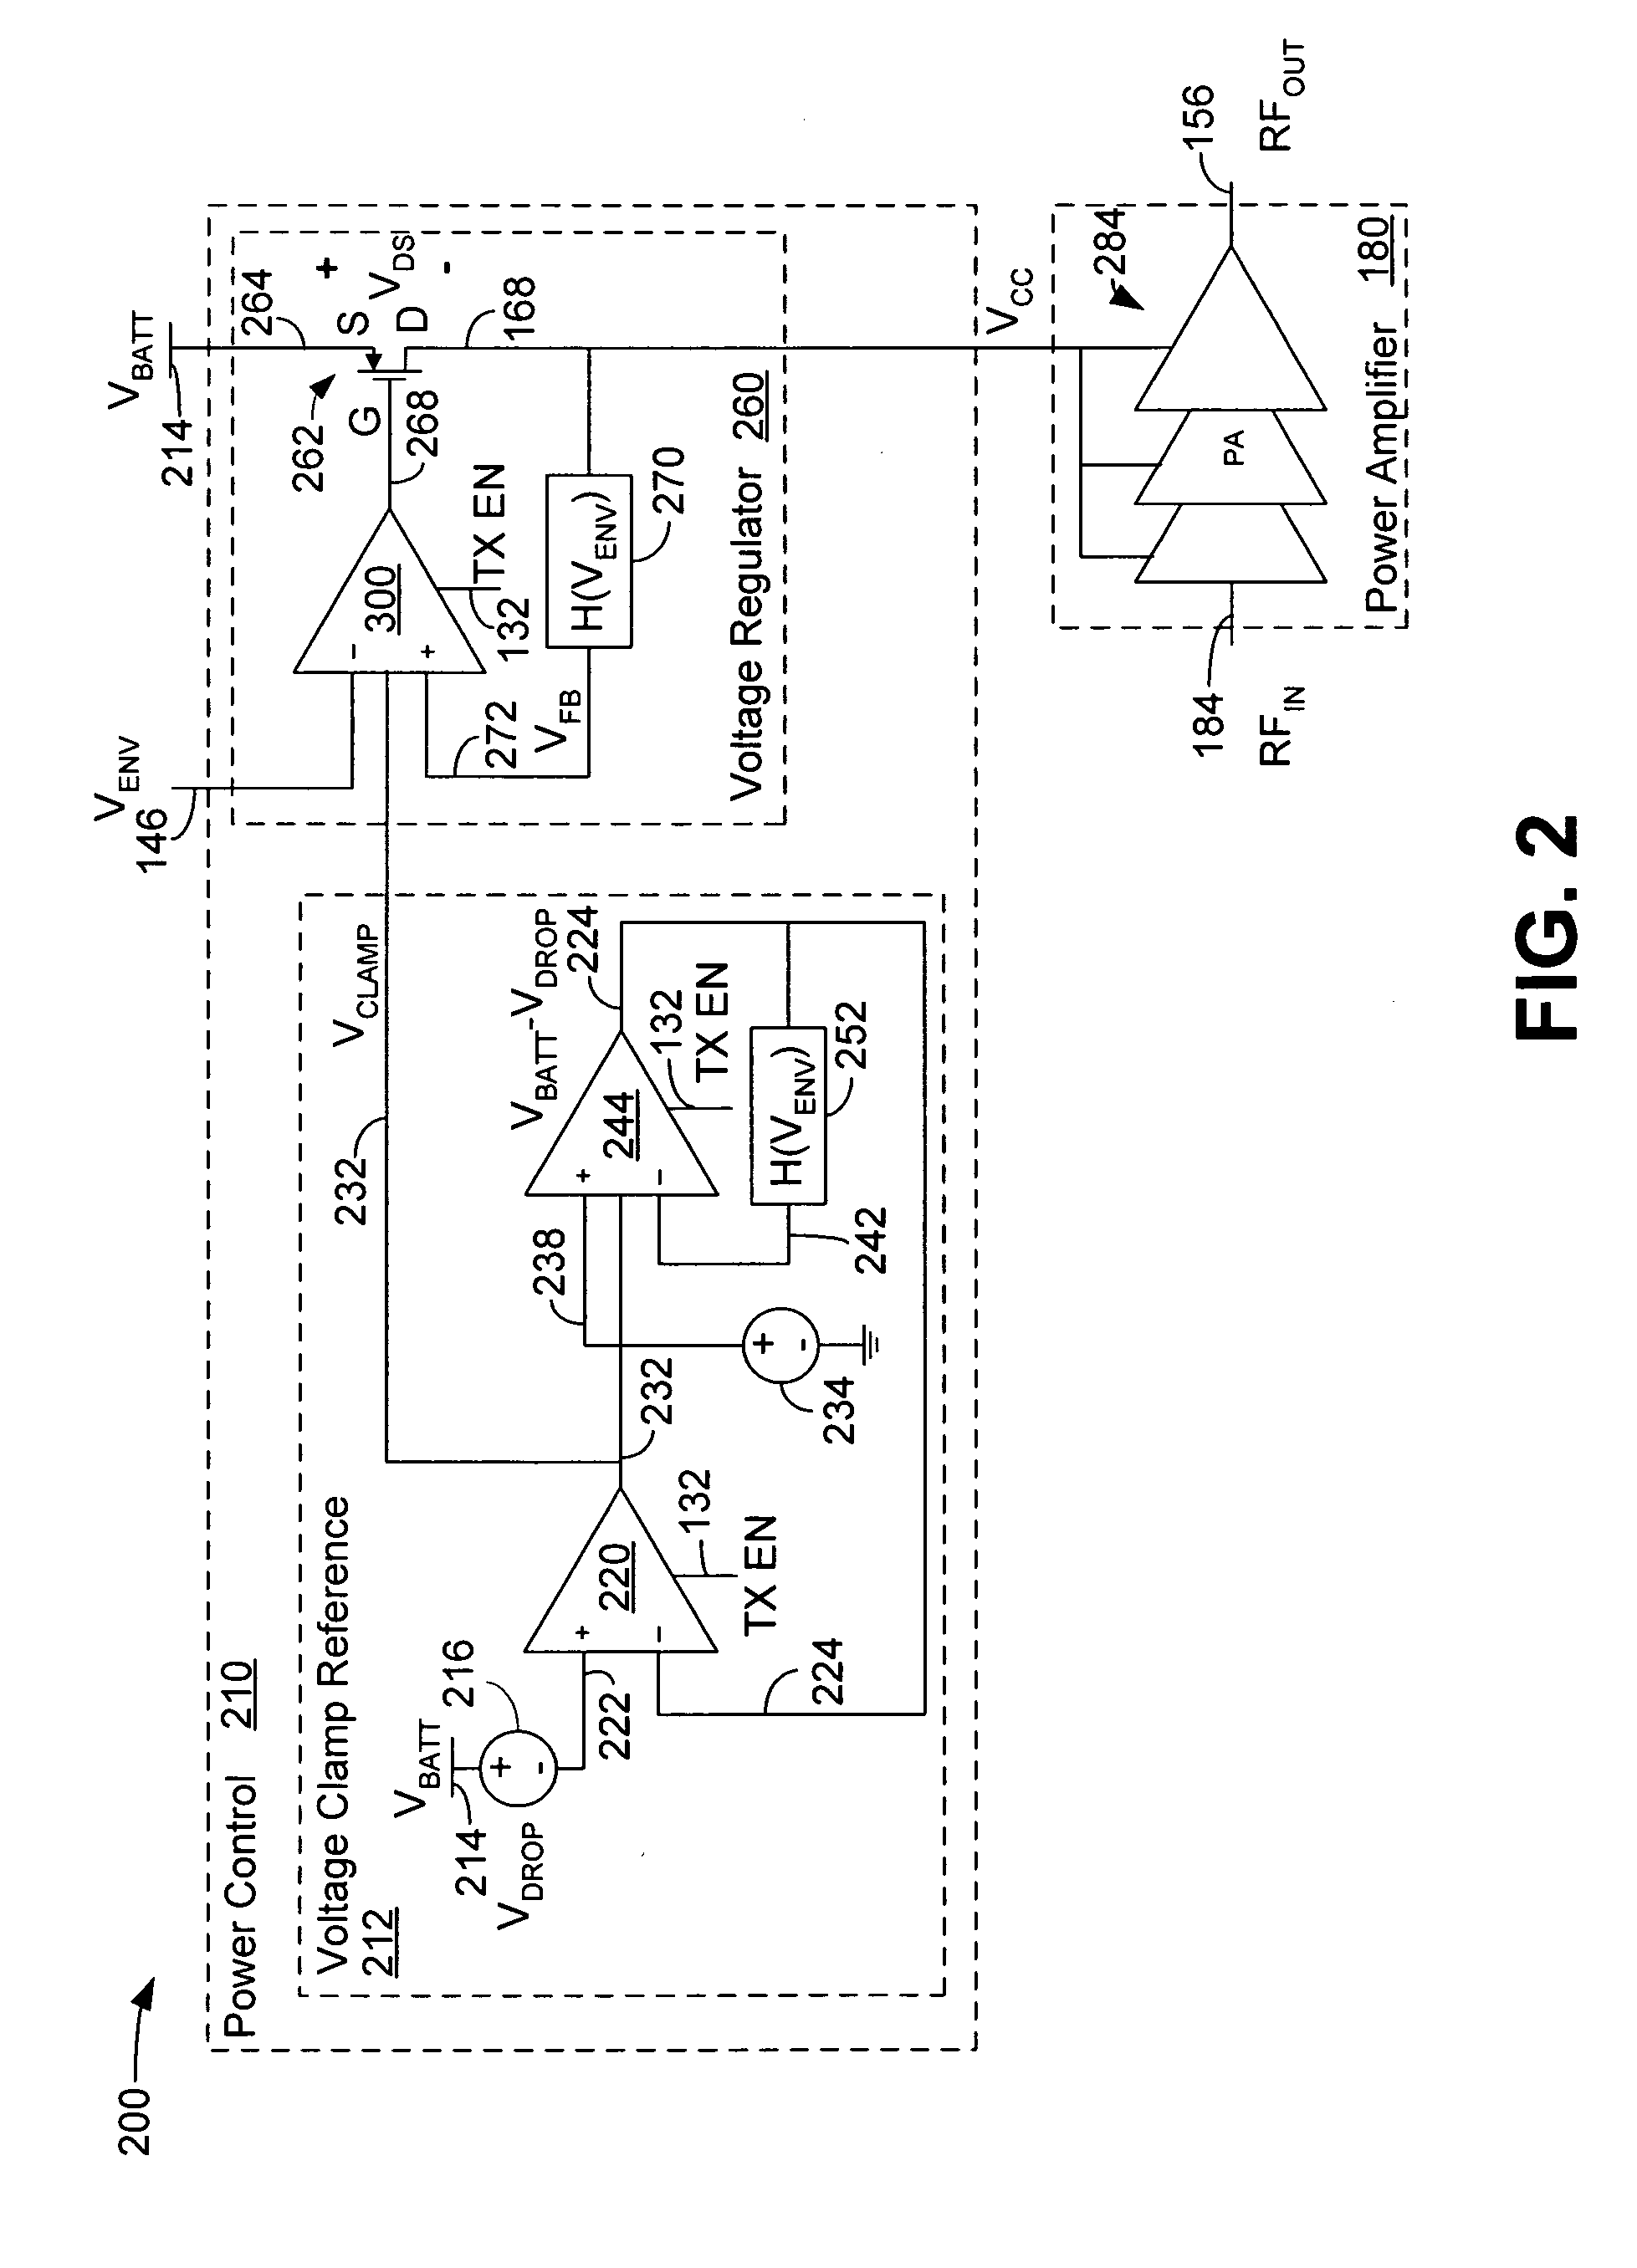 Voltage clamp for improved transient performance of a collector voltage controlled power amplifier